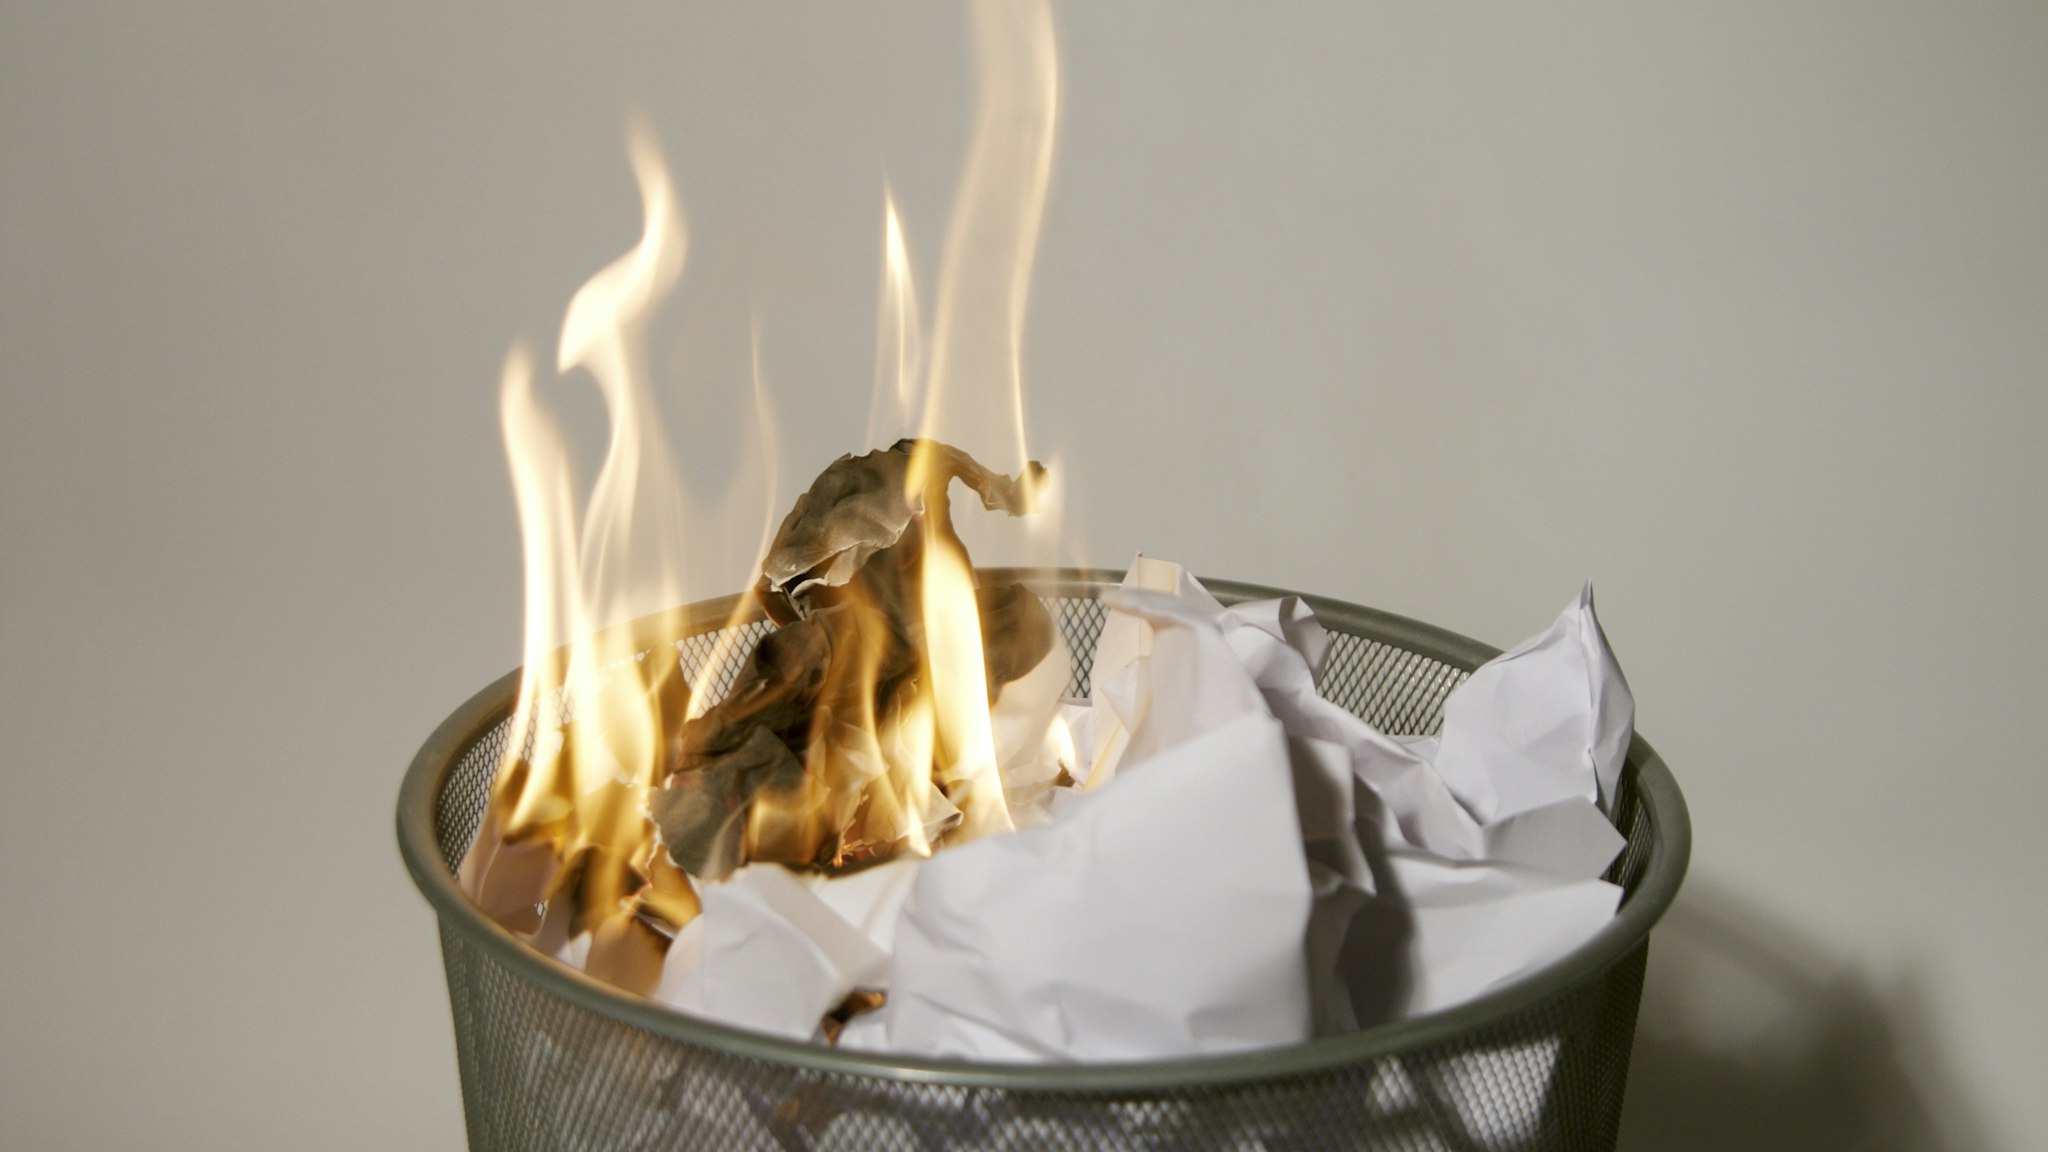 Fire in a wastepaper basket - stock photo